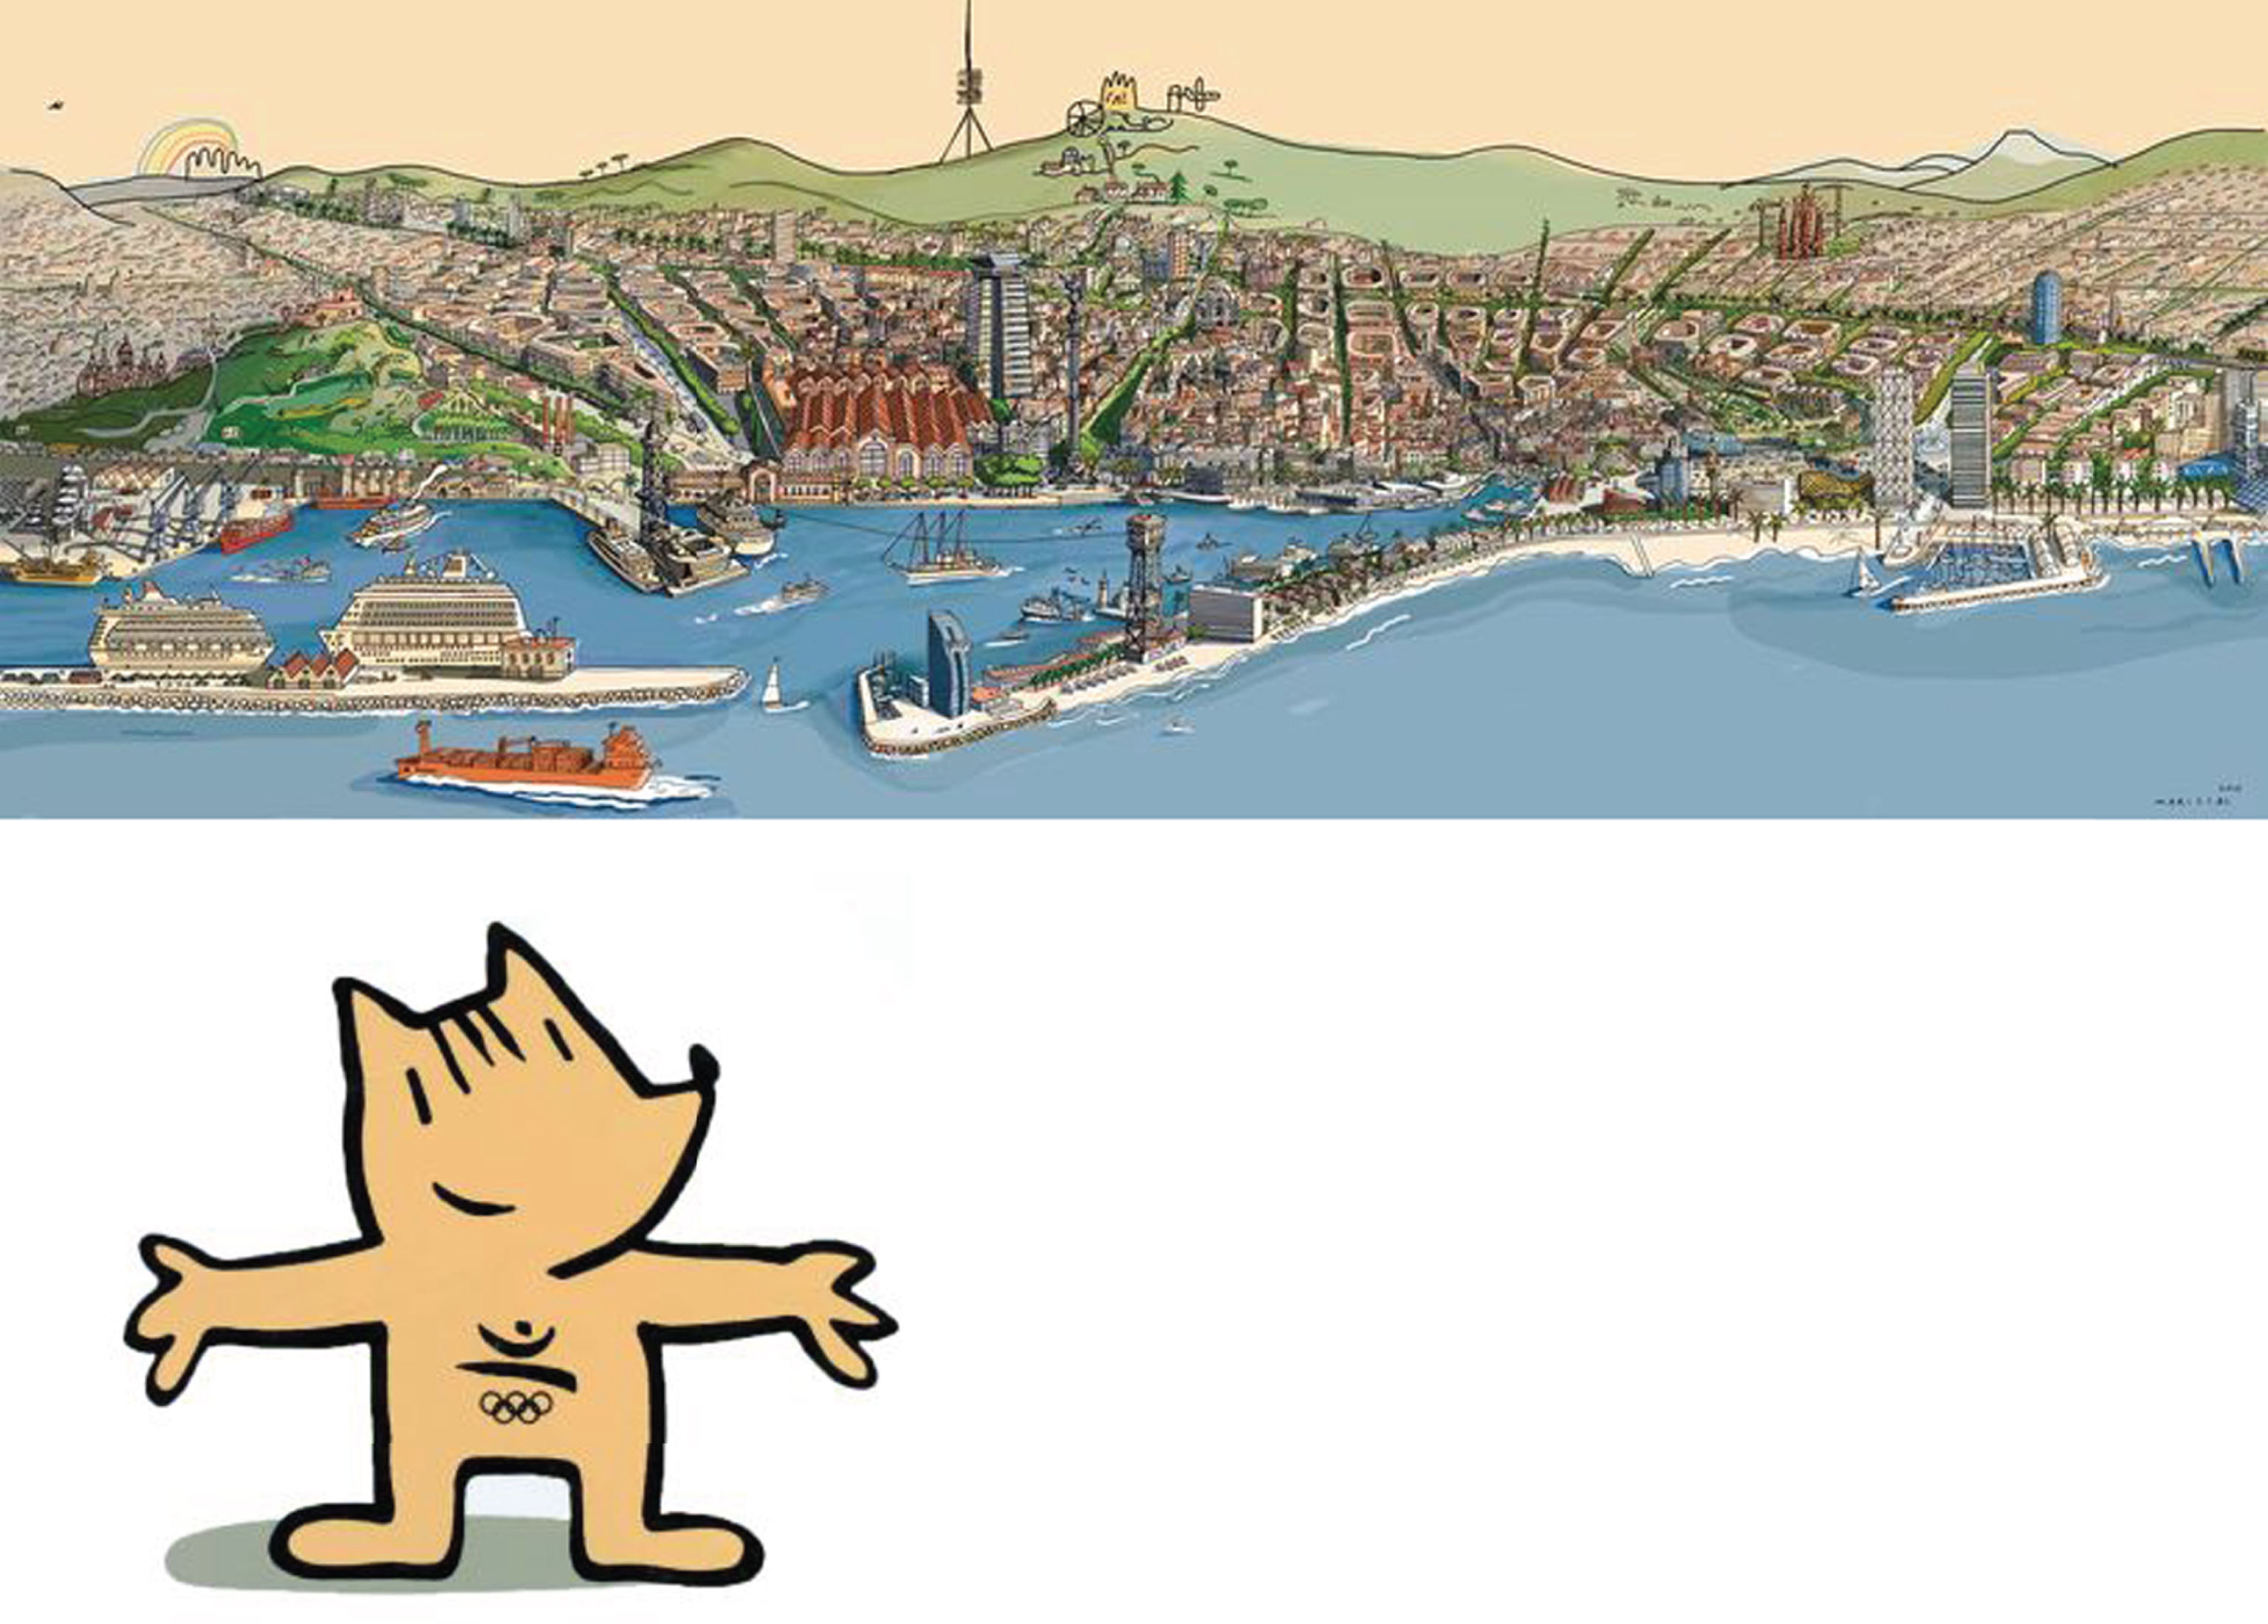 Barcelona and Cobi, the mascot for the Barcelona 1992, by Javier Mariscal, an interdisciplinary artist born in Valencia, working and living in Barcelona since 1970.